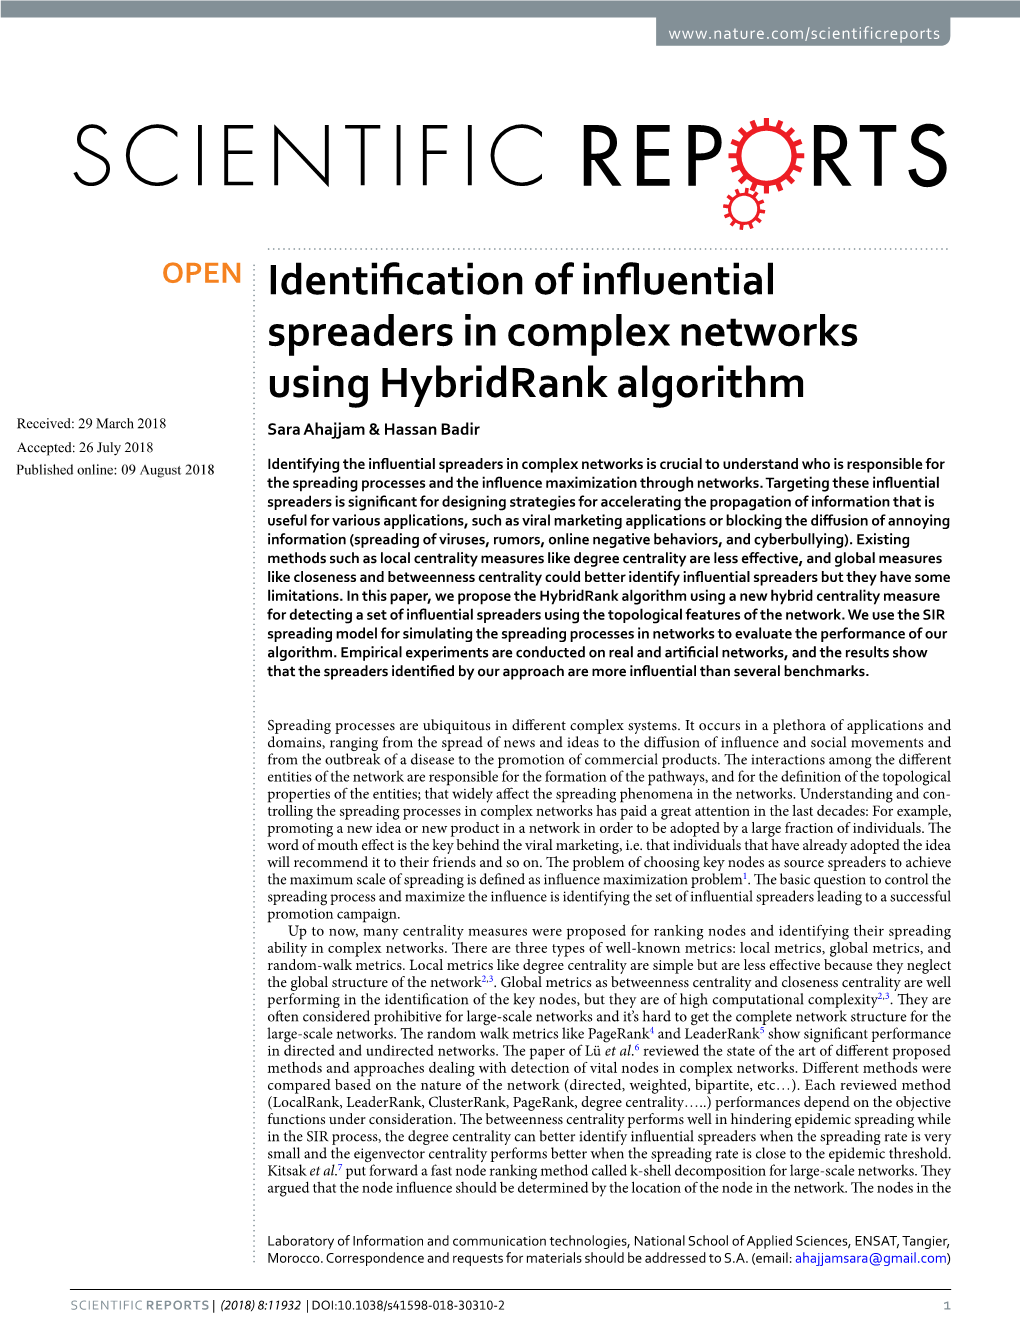 Identification of Influential Spreaders in Complex Networks Using